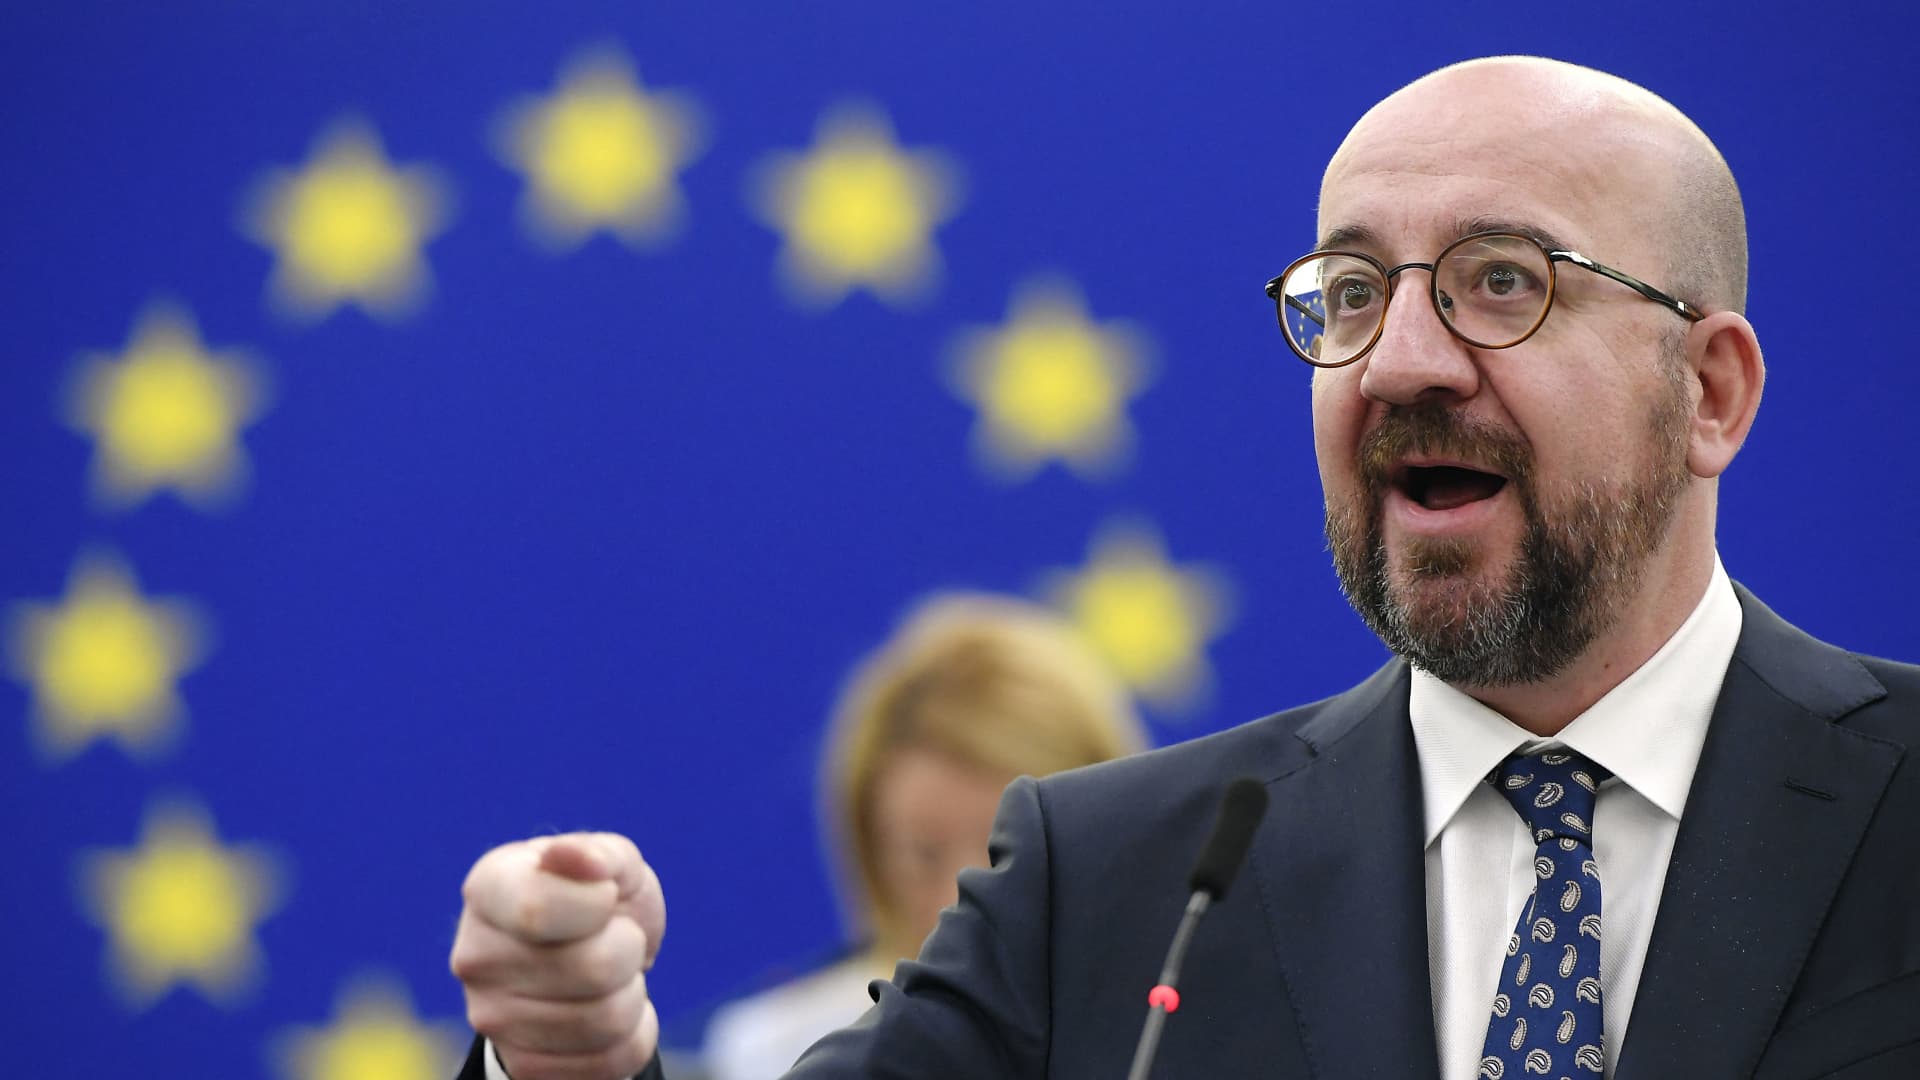 European Council President Charles Michel gestures as he speaks during a debate on the conclusions of the European Council meeting regarding Russian invasion of Ukraine during a plenary session at the European Parliament in Strasbourg, eastern France, on April 6, 2022.